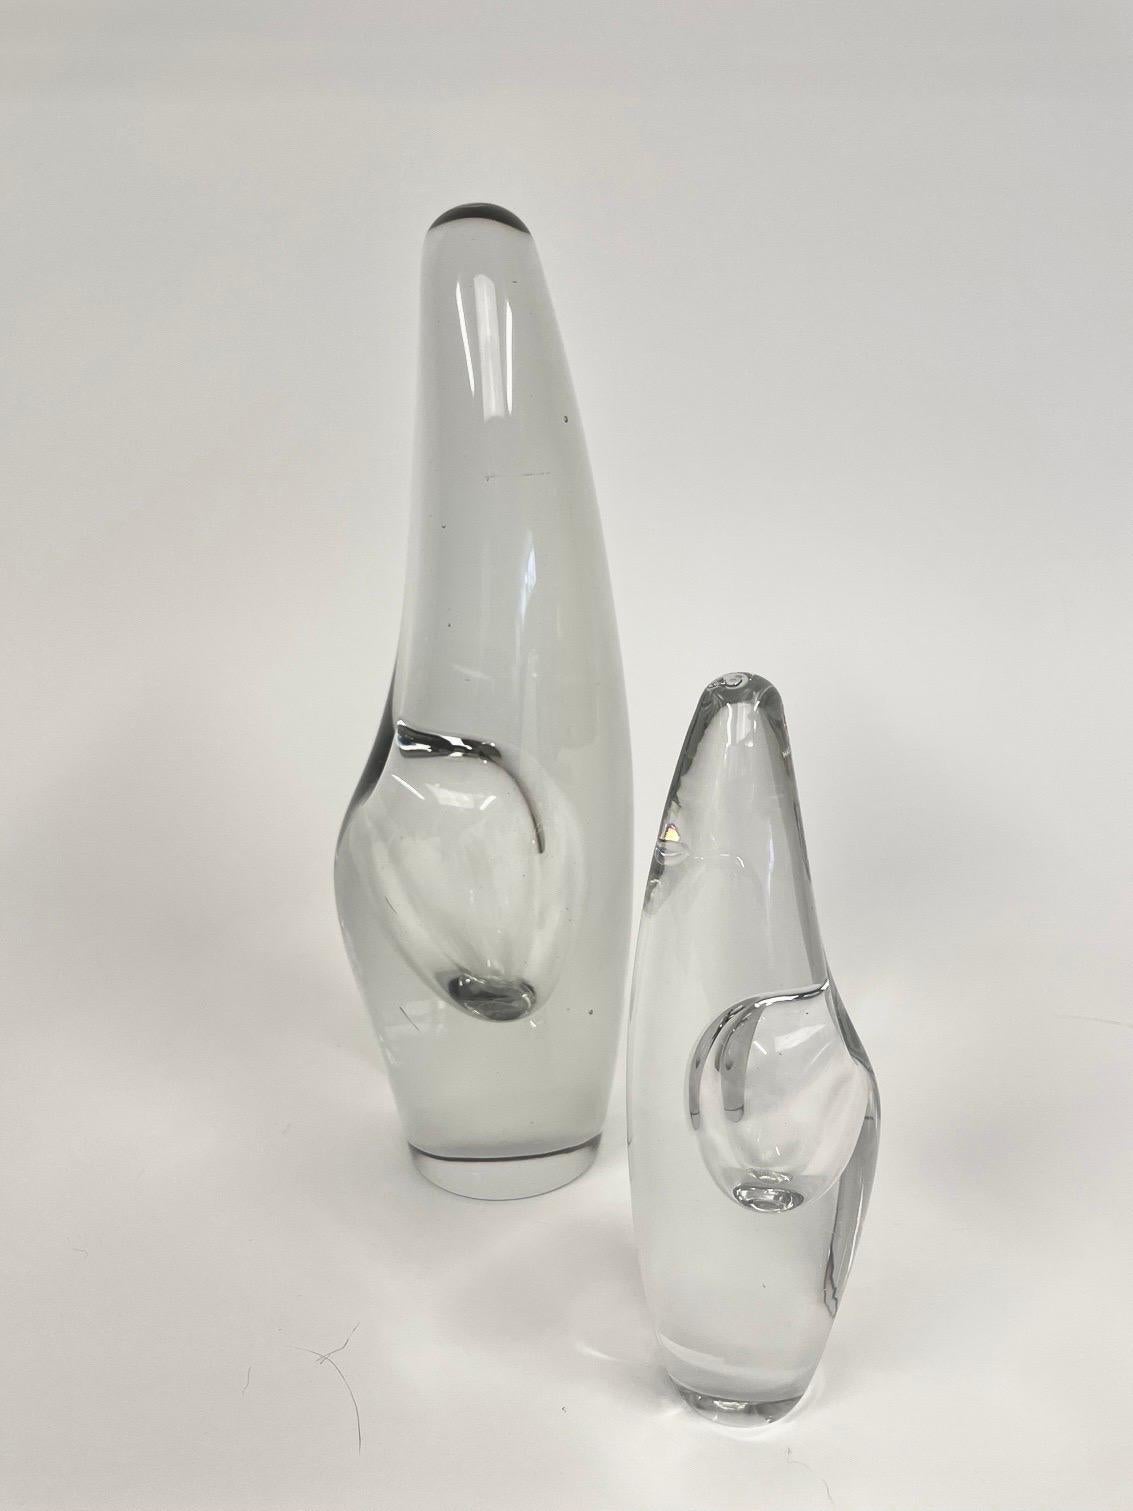 This is the Finnish sculptural pair of vases, model Orckidéa 3568 designed in 1953 in polished crystal glass from Ittala.
They comes with a tower-shaped, tapered shape with a gently rounded top. A steam blown recess in the middle of the sculpture